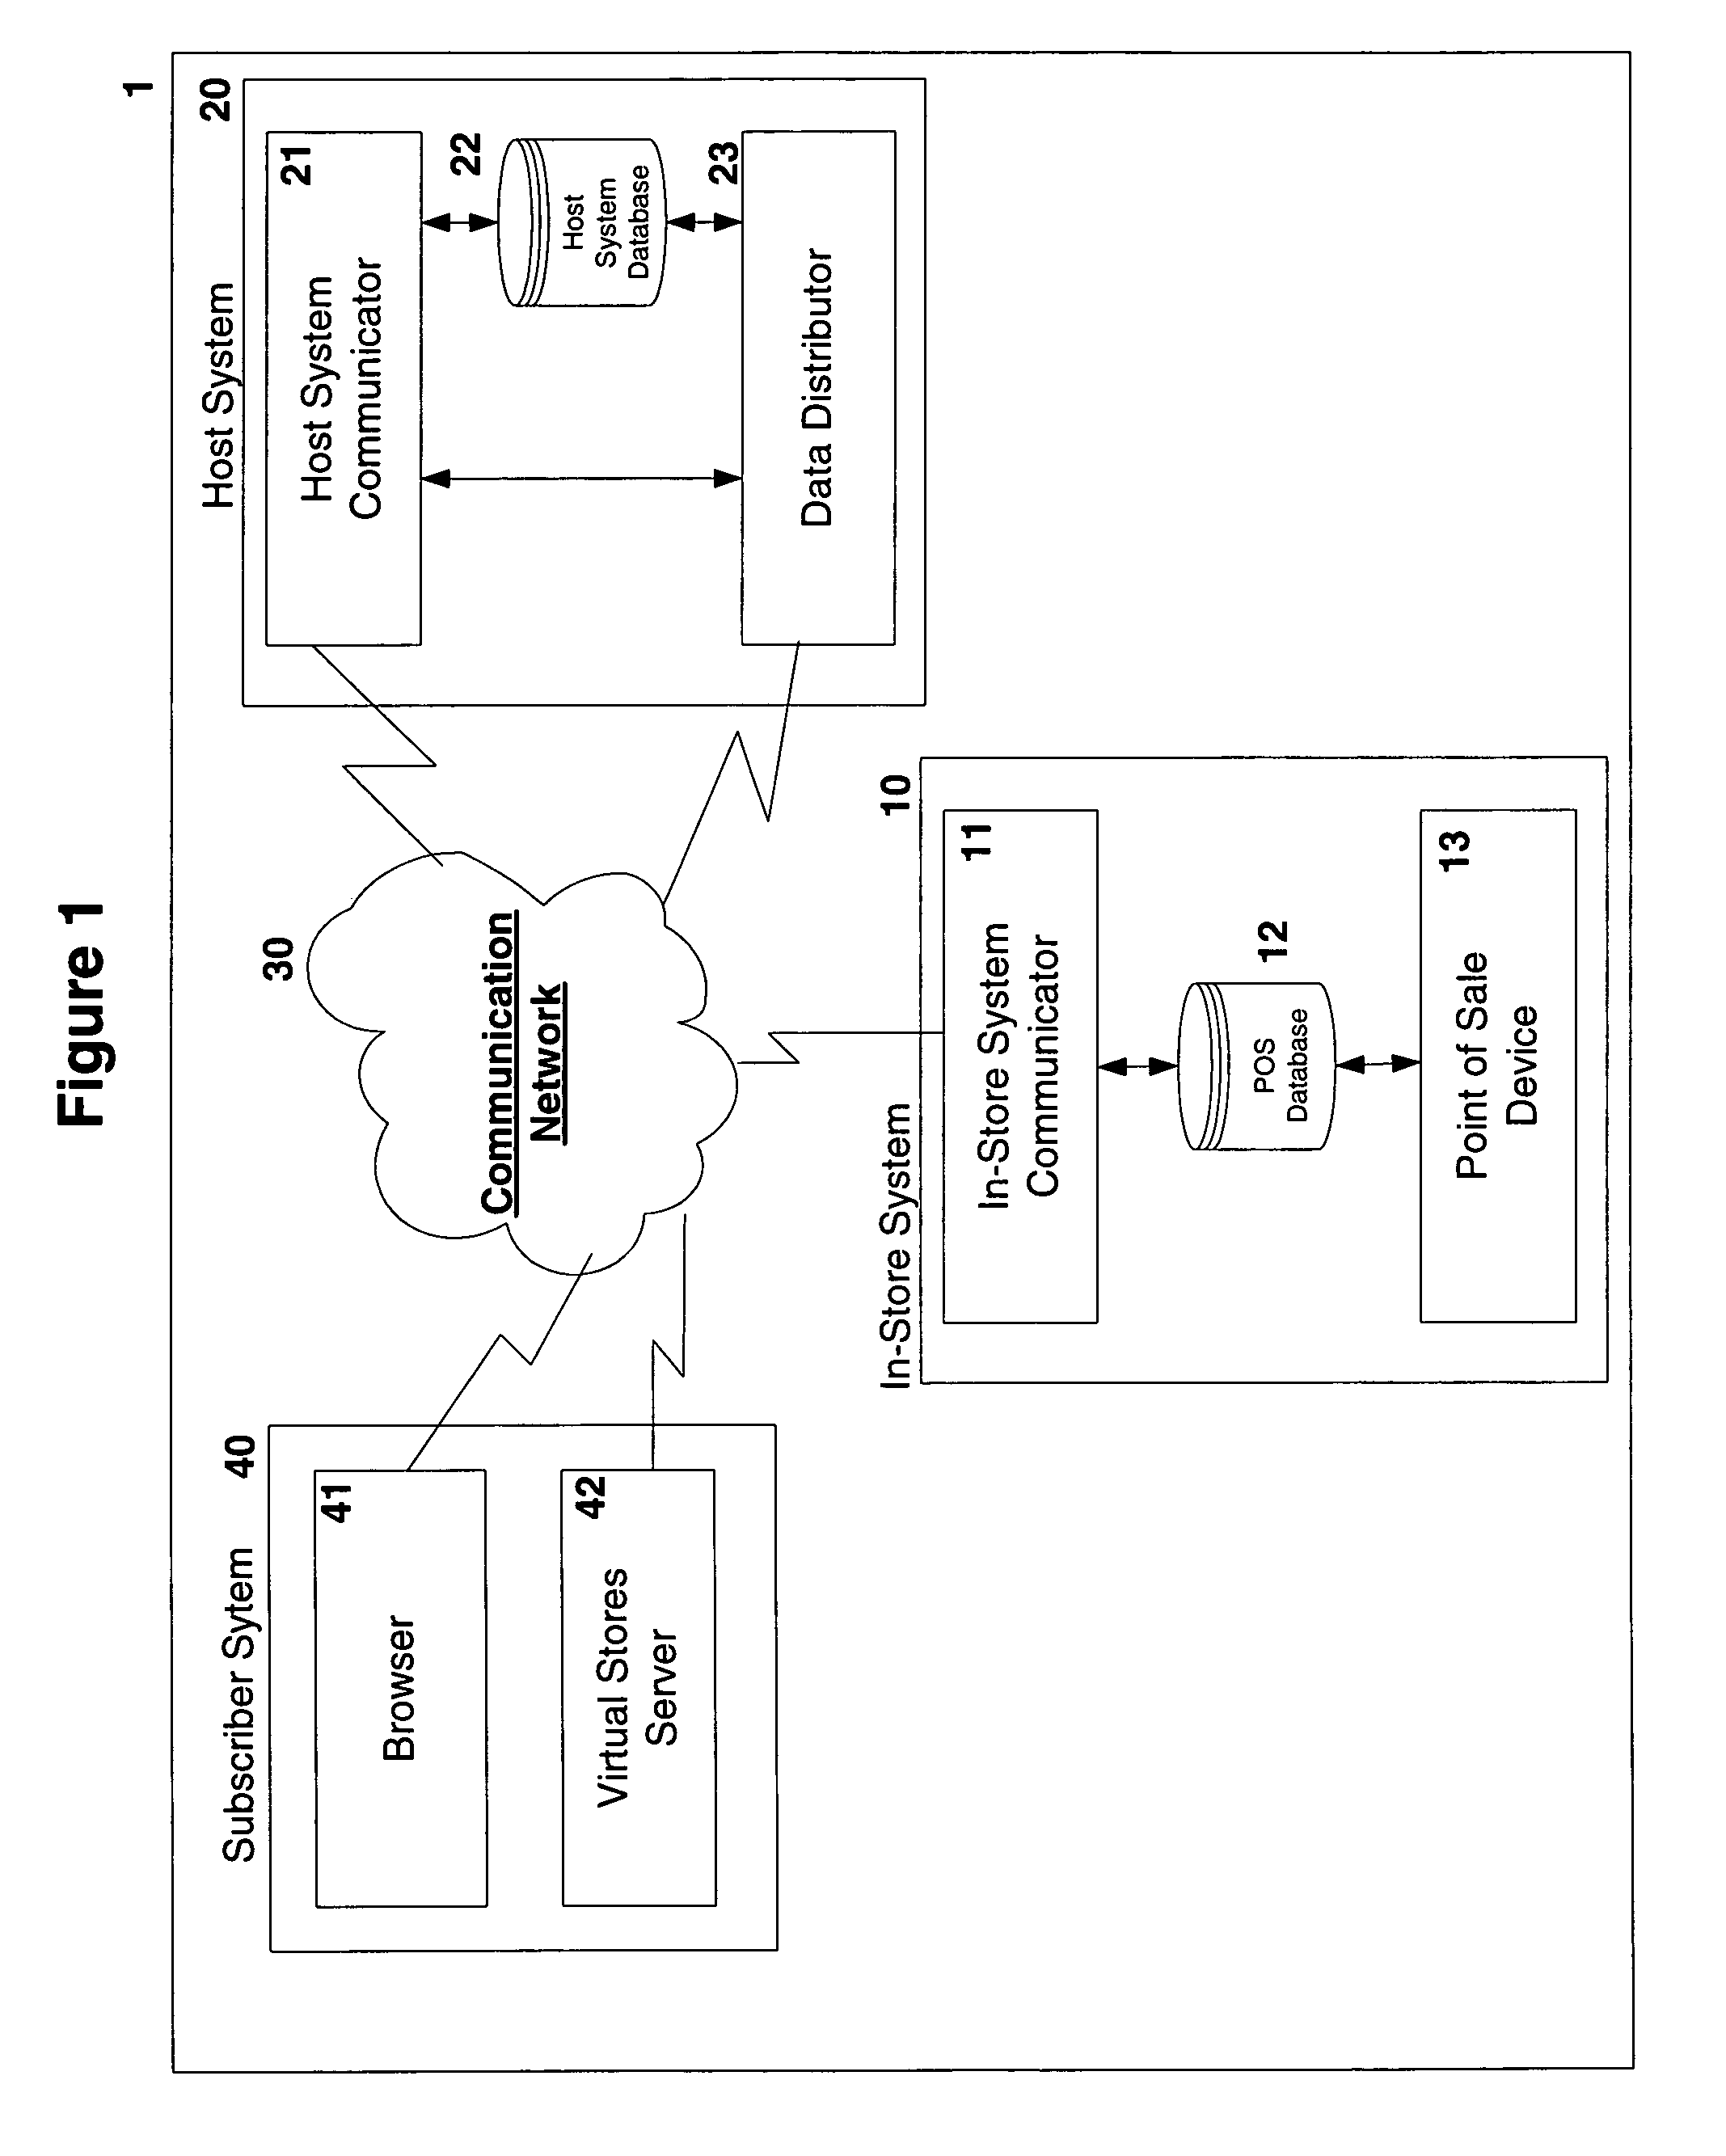 System and method for distributing in real-time, inventory data acquired from in-store point of sale terminals